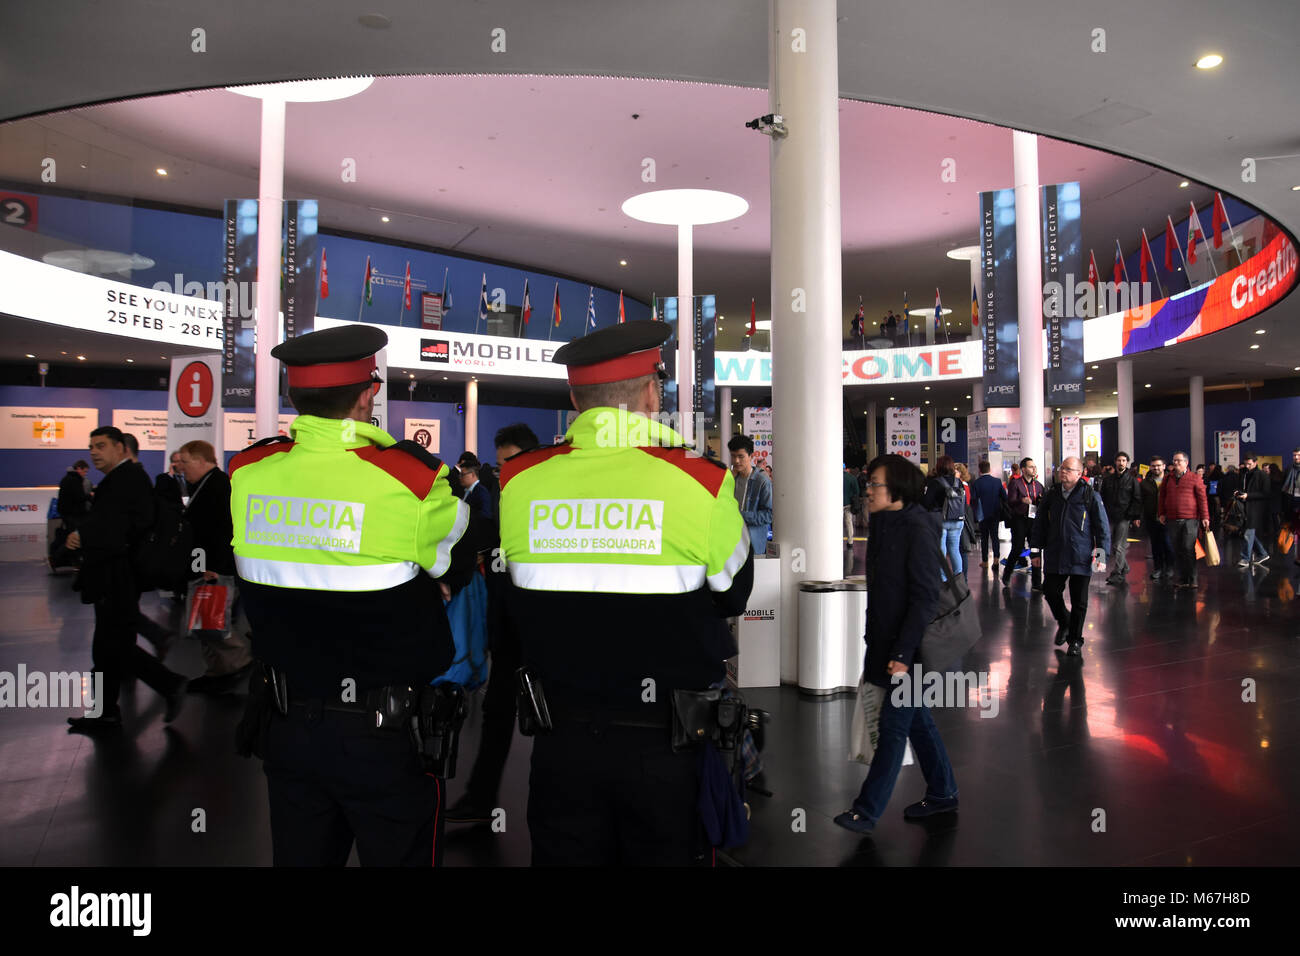 Barcelona, Spain. 1st Mar, 2018. Two agents of the Catalan Police guard access to the Mobile World Congress.The Mobile World Congress 2018 is being hosted in Barcelona from 26 February to 1st March. Credit: Workers that make possible the MWC7  7 .jpg/SOPA Images/ZUMA Wire/Alamy Live News Stock Photo